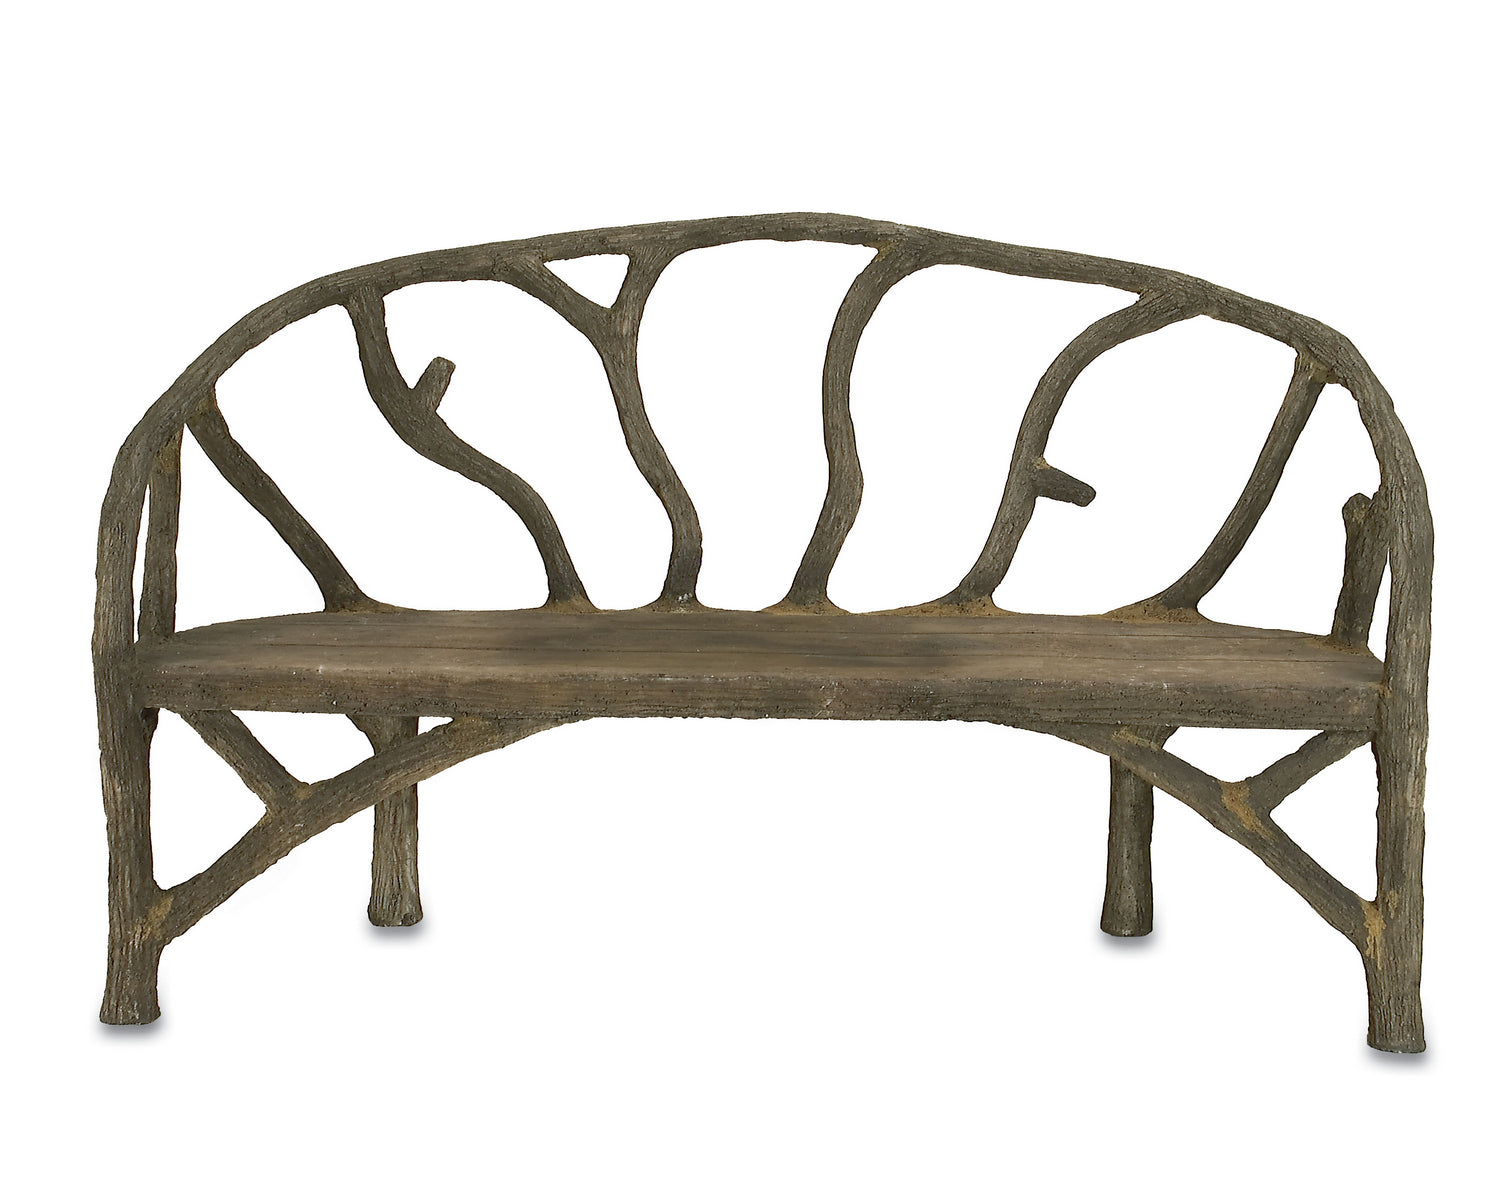 Bench from the Arbor collection in Portland/Faux Bois finish